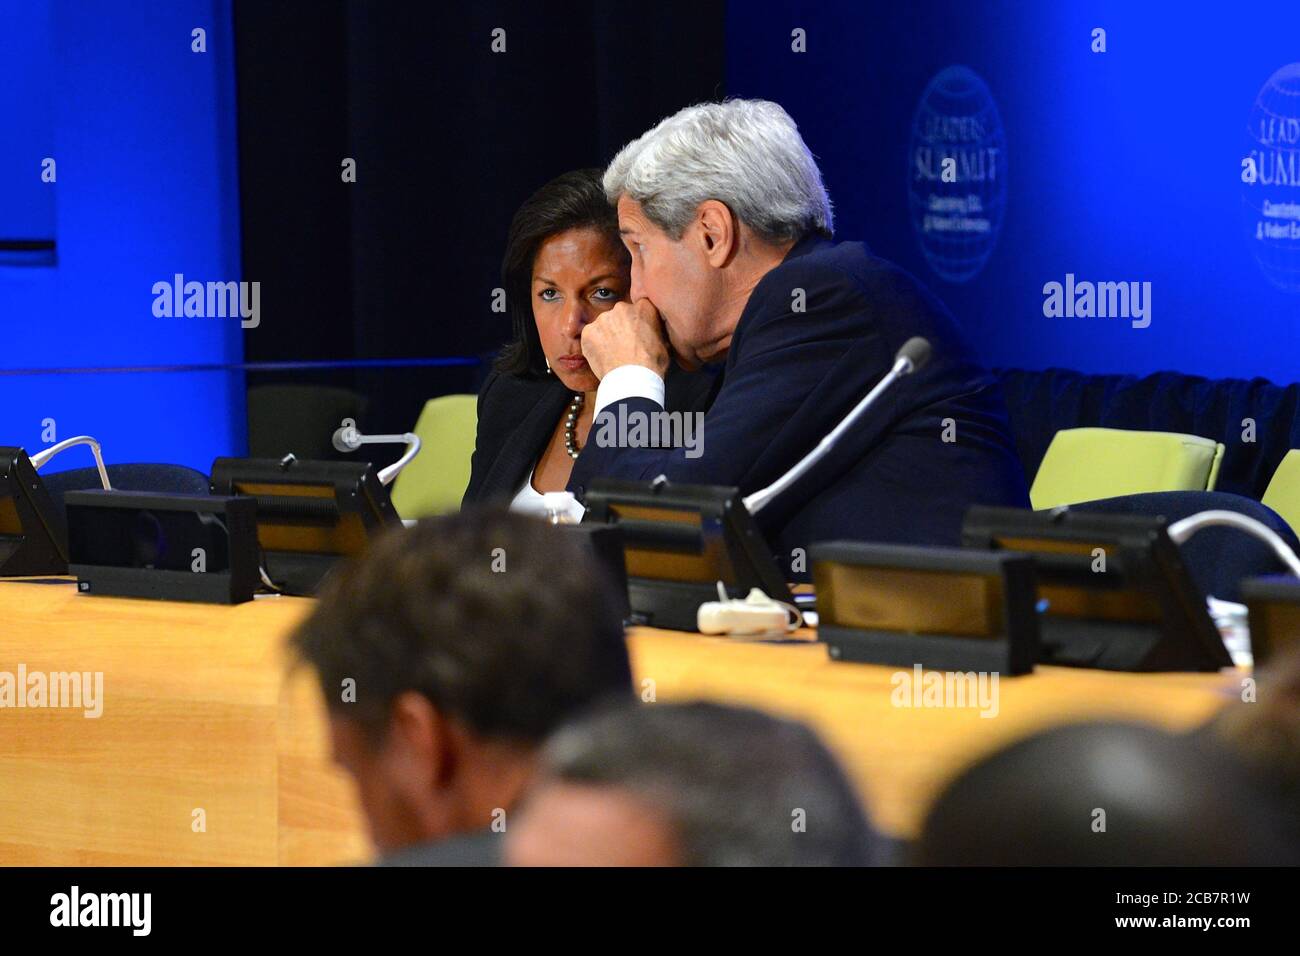 U.S. Secretary of State John Kerry chats with Ambassador Susan Rice the President's National Security Advisor during the Leaders Summit to Counter ISIL and Violent Extremism at the United Nations Headquarters in New York City on September 29 2015 Stock Photo